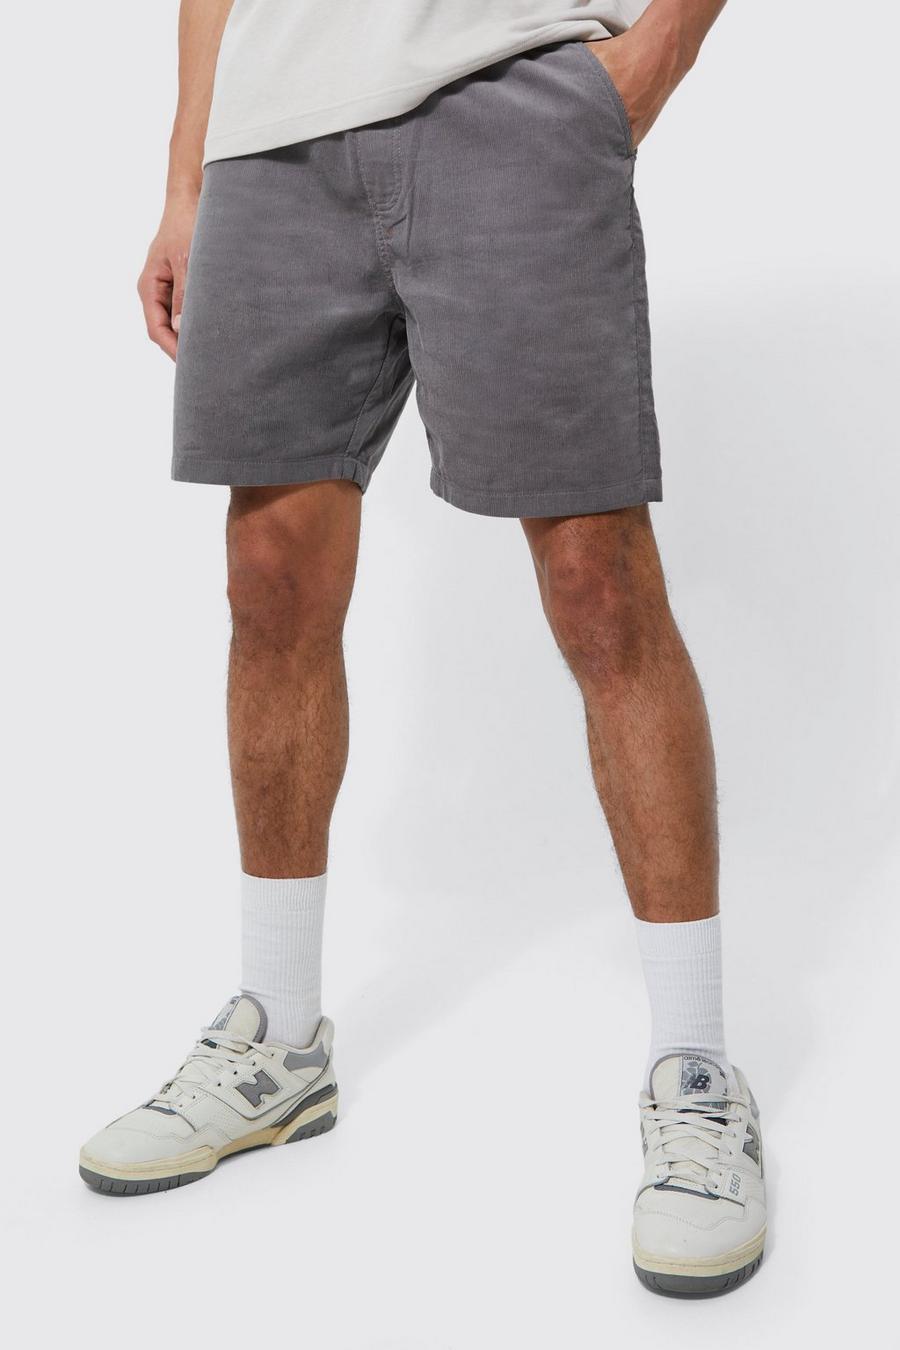 boohooMAN Relaxed Fit Contrast Gusset Jersey Short - Black - Size XS